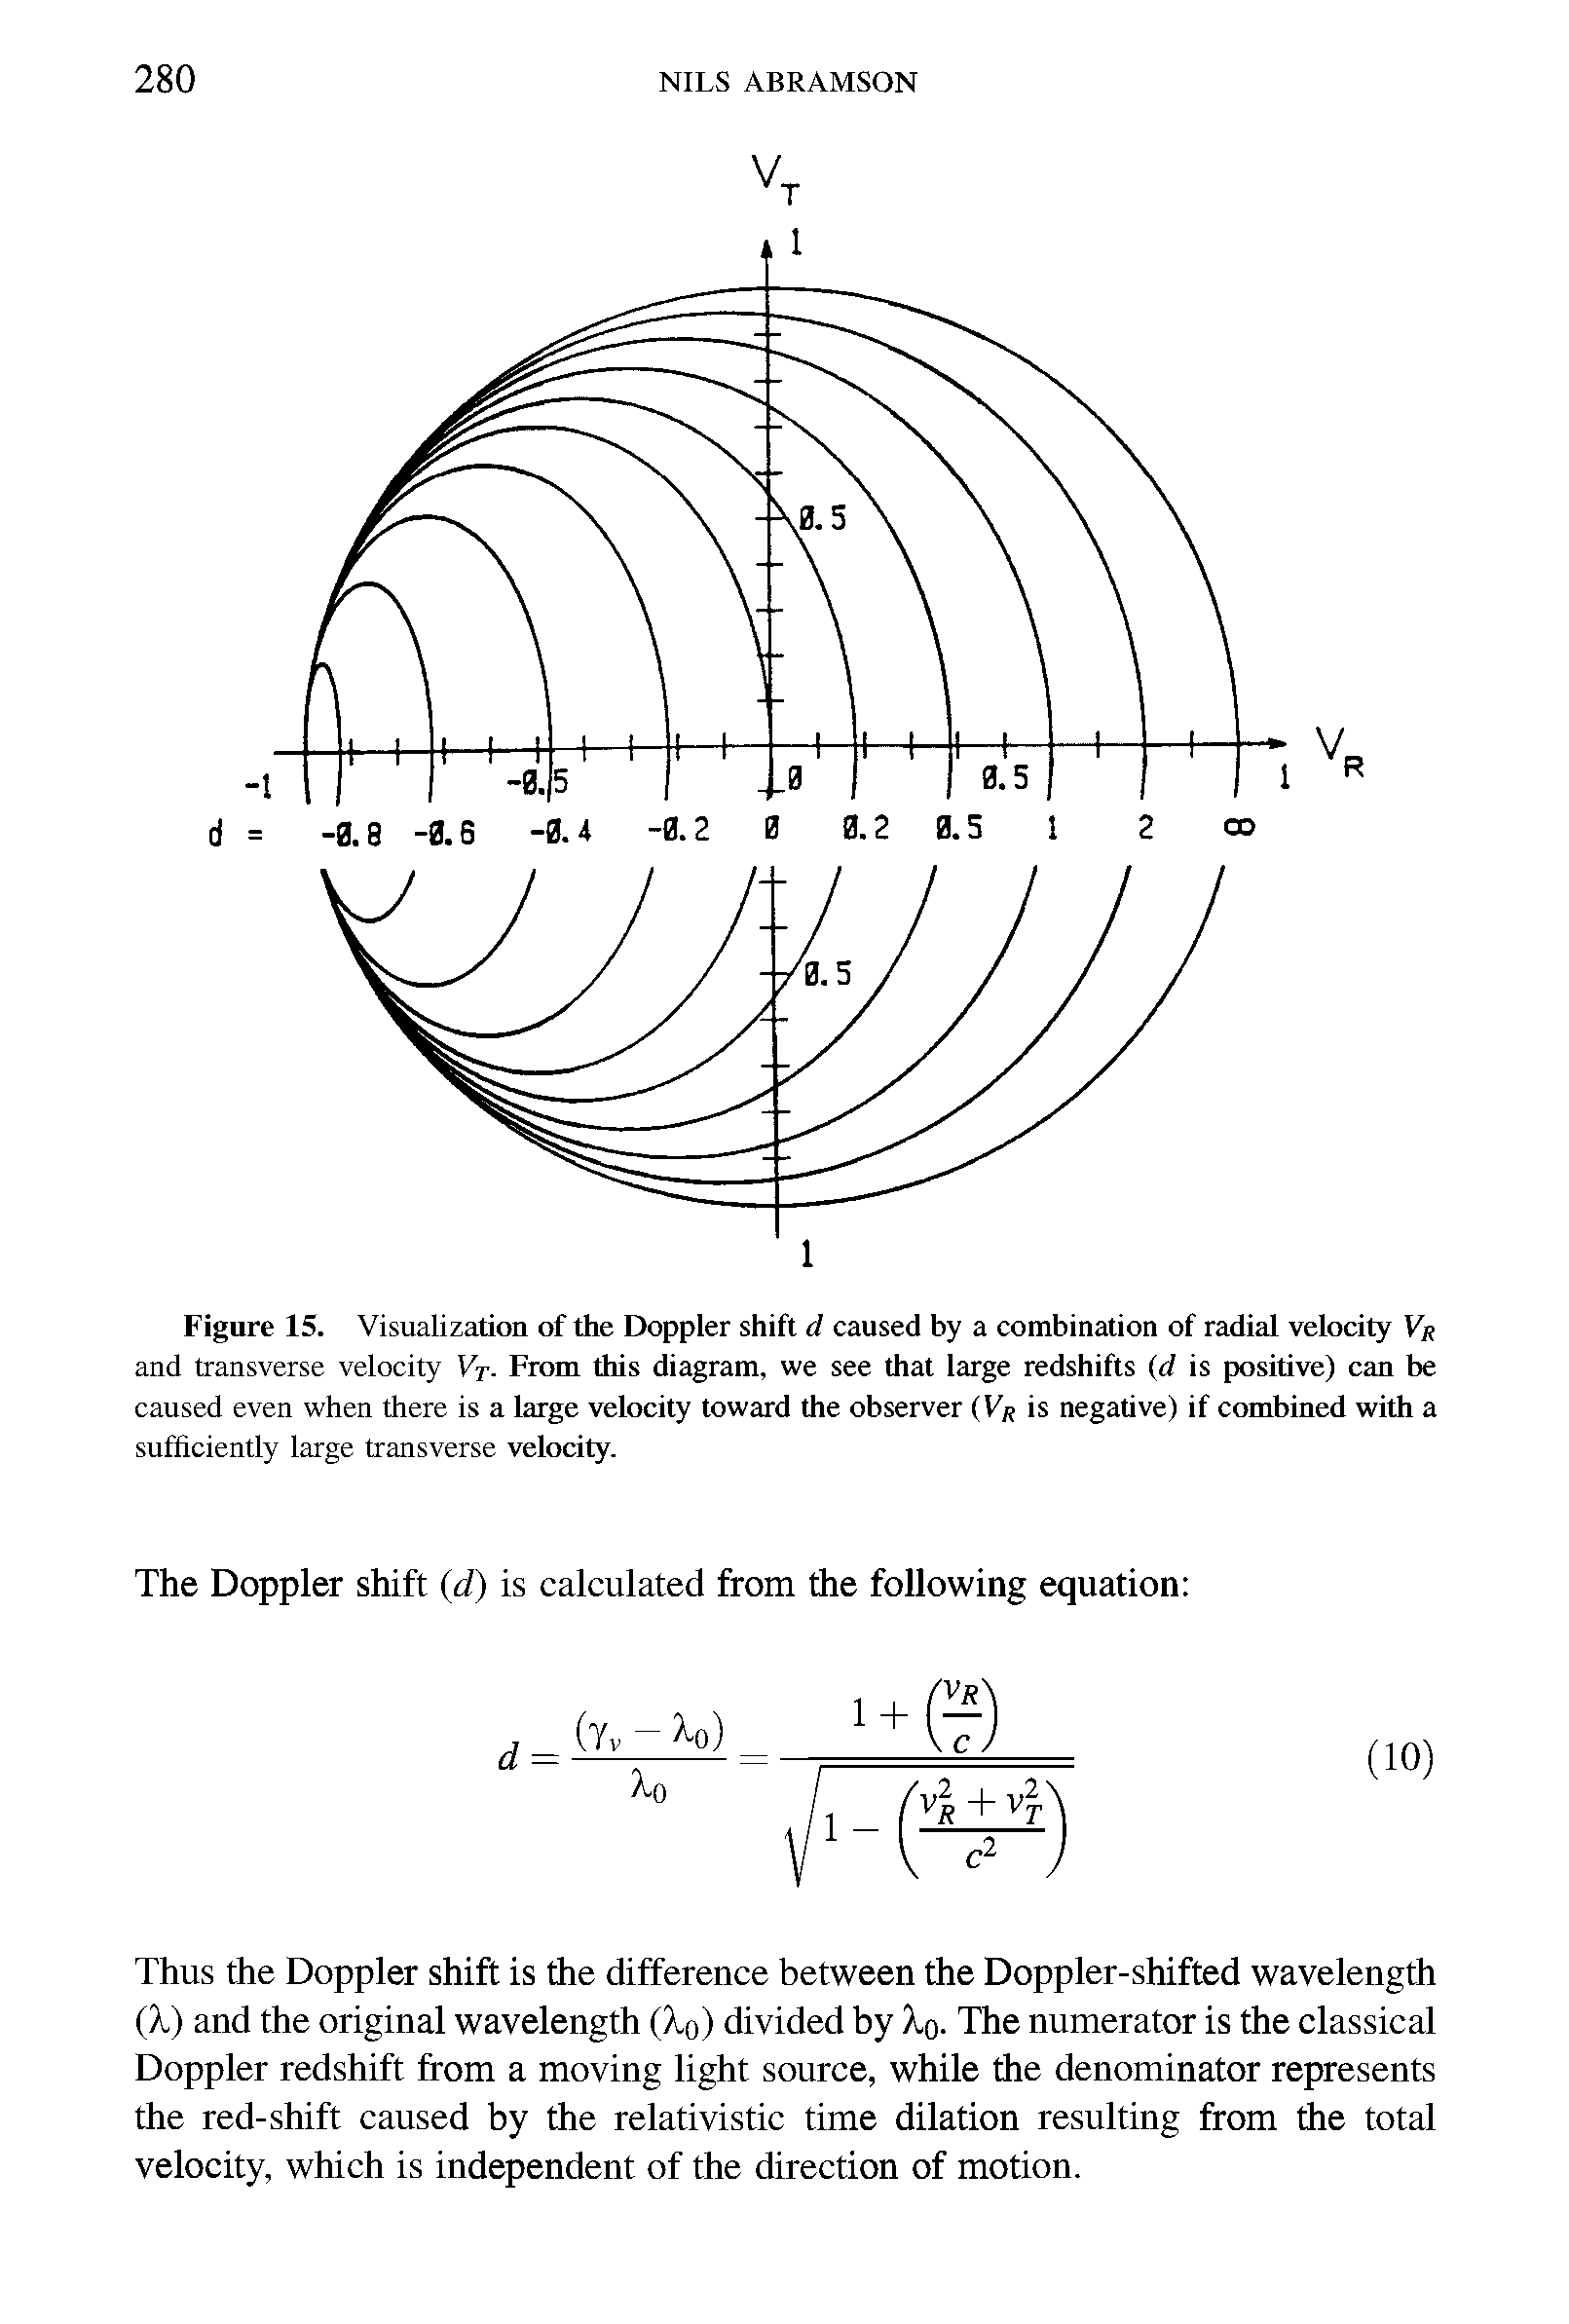 Figure 15. Visualization of the Doppler shift d caused by a combination of radial velocity Vr and transverse velocity Vt- From this diagram, we see that large redshifts (d is positive) can be caused even when there is a large velocity toward the observer (Vr is negative) if combined with a sufficiently large transverse velocity.